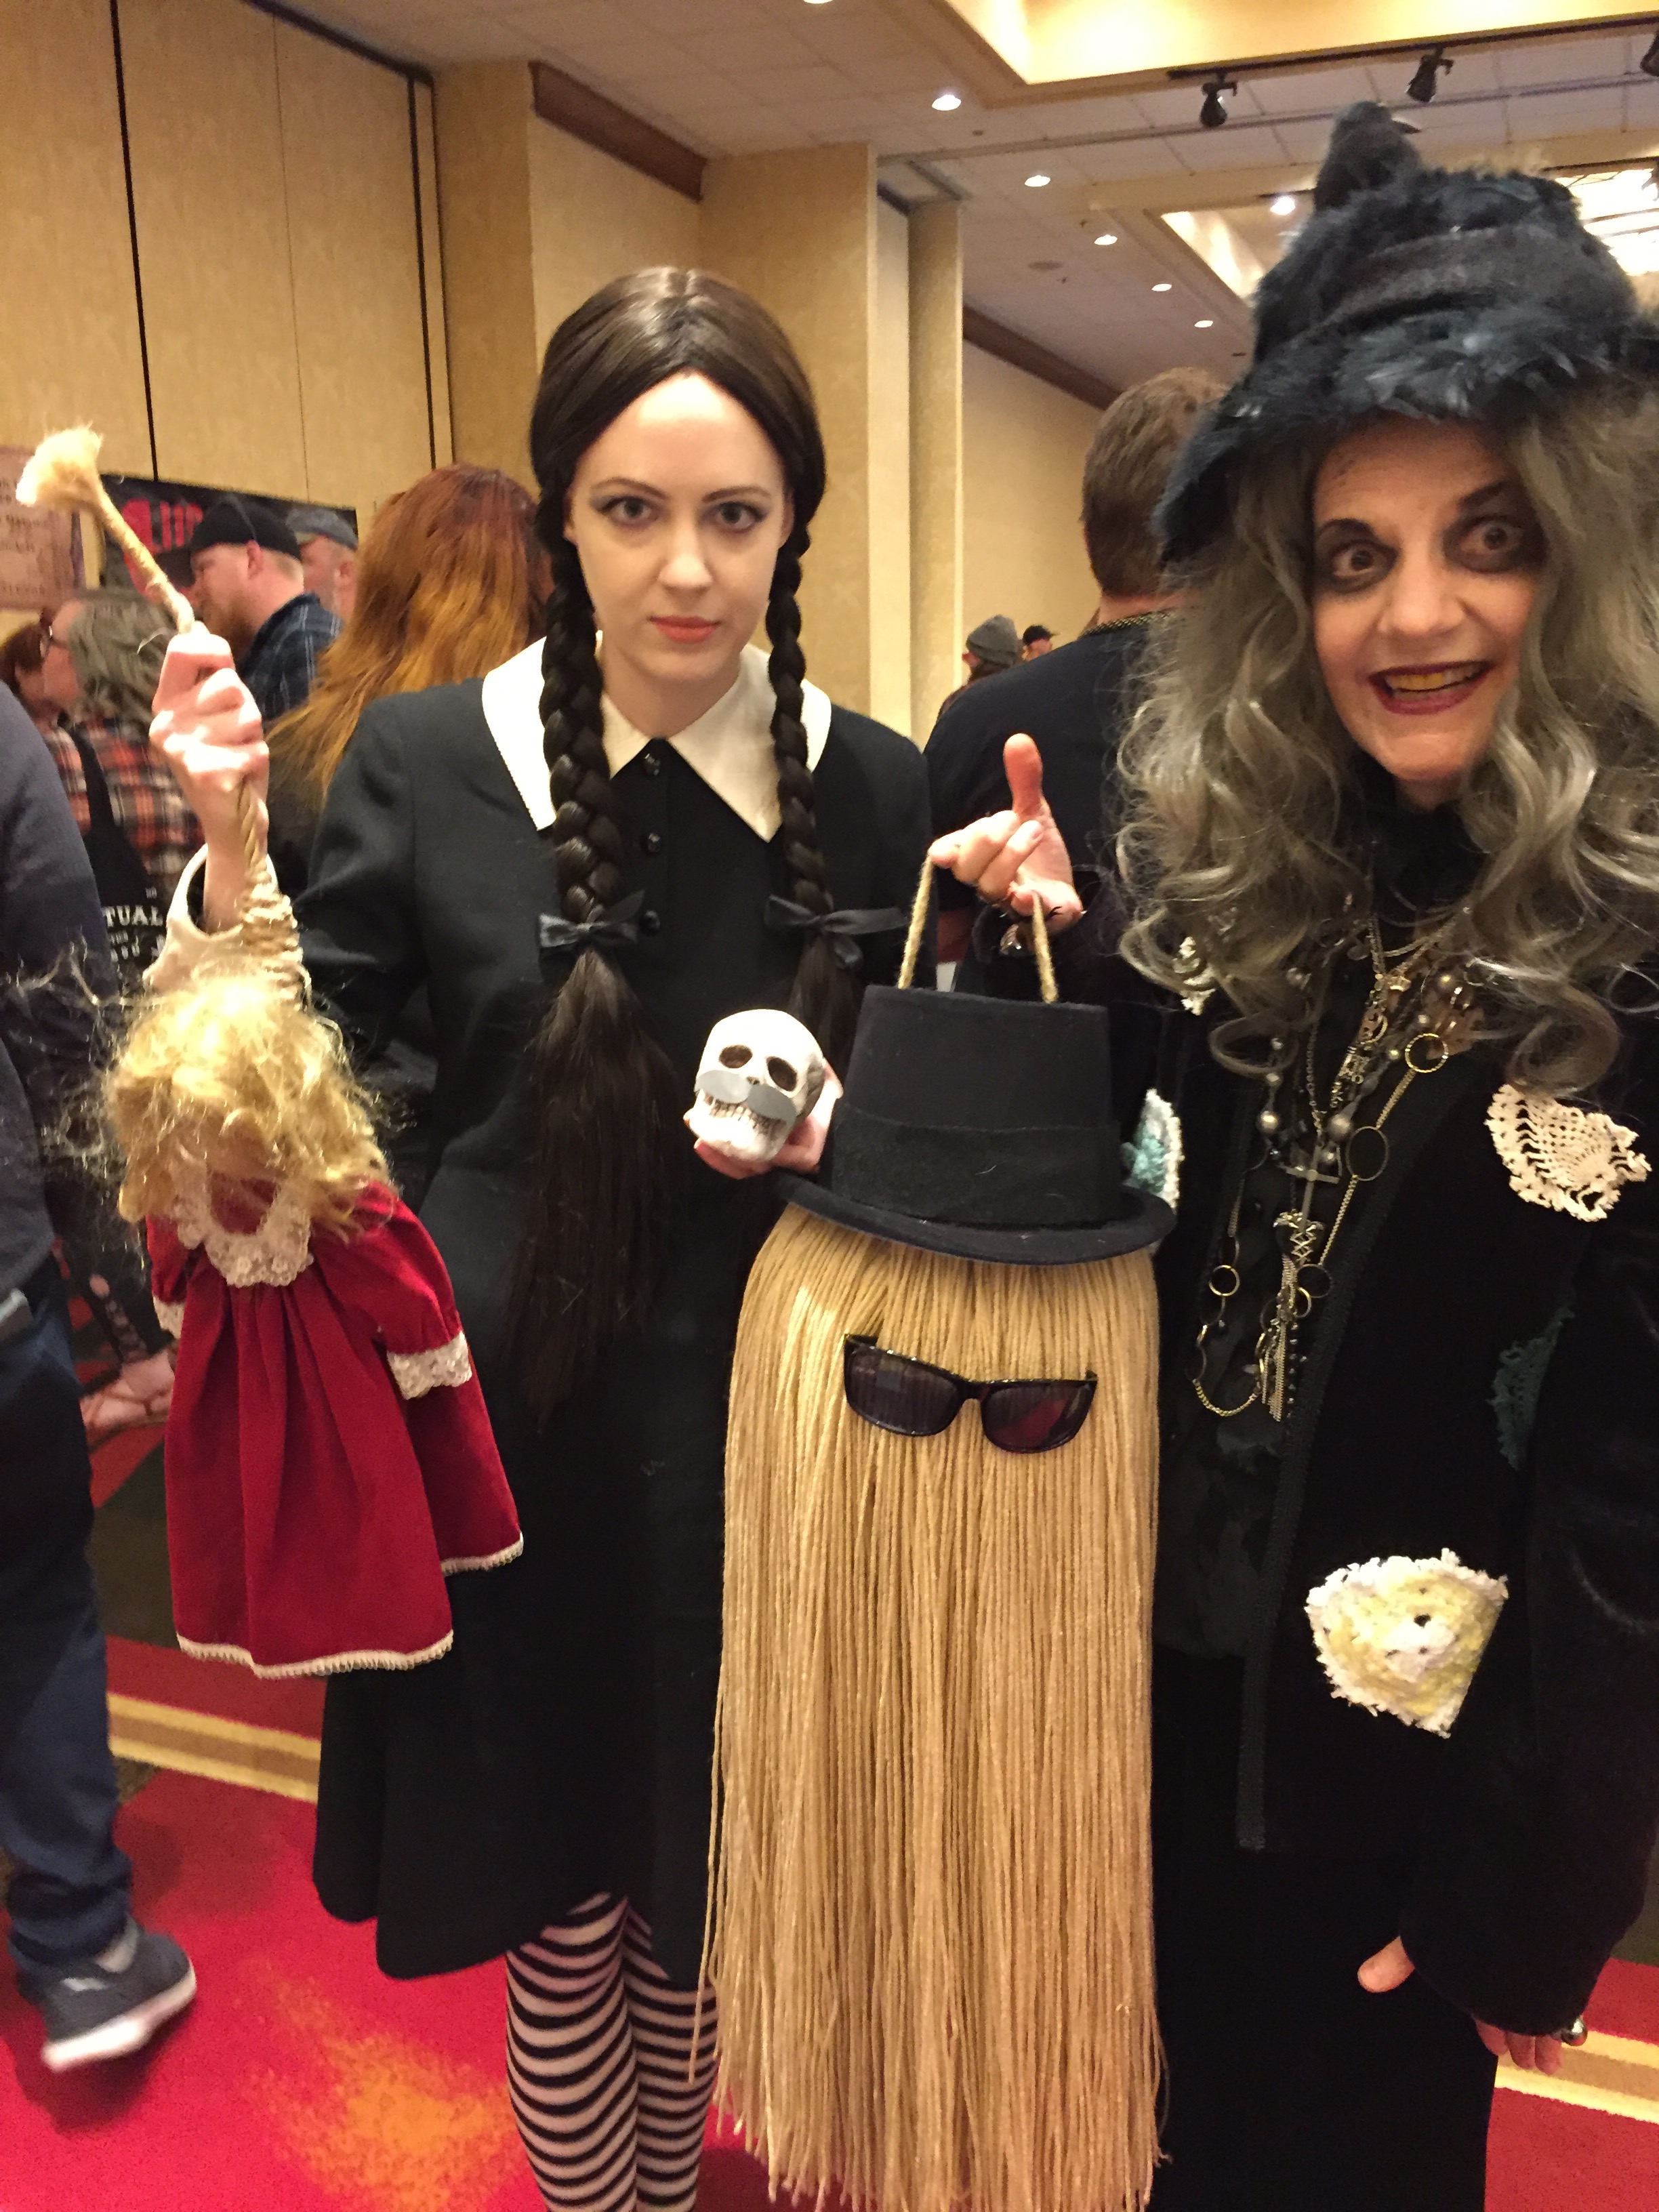 Photo of Addams Family cosplayers posing with Scott the Skull